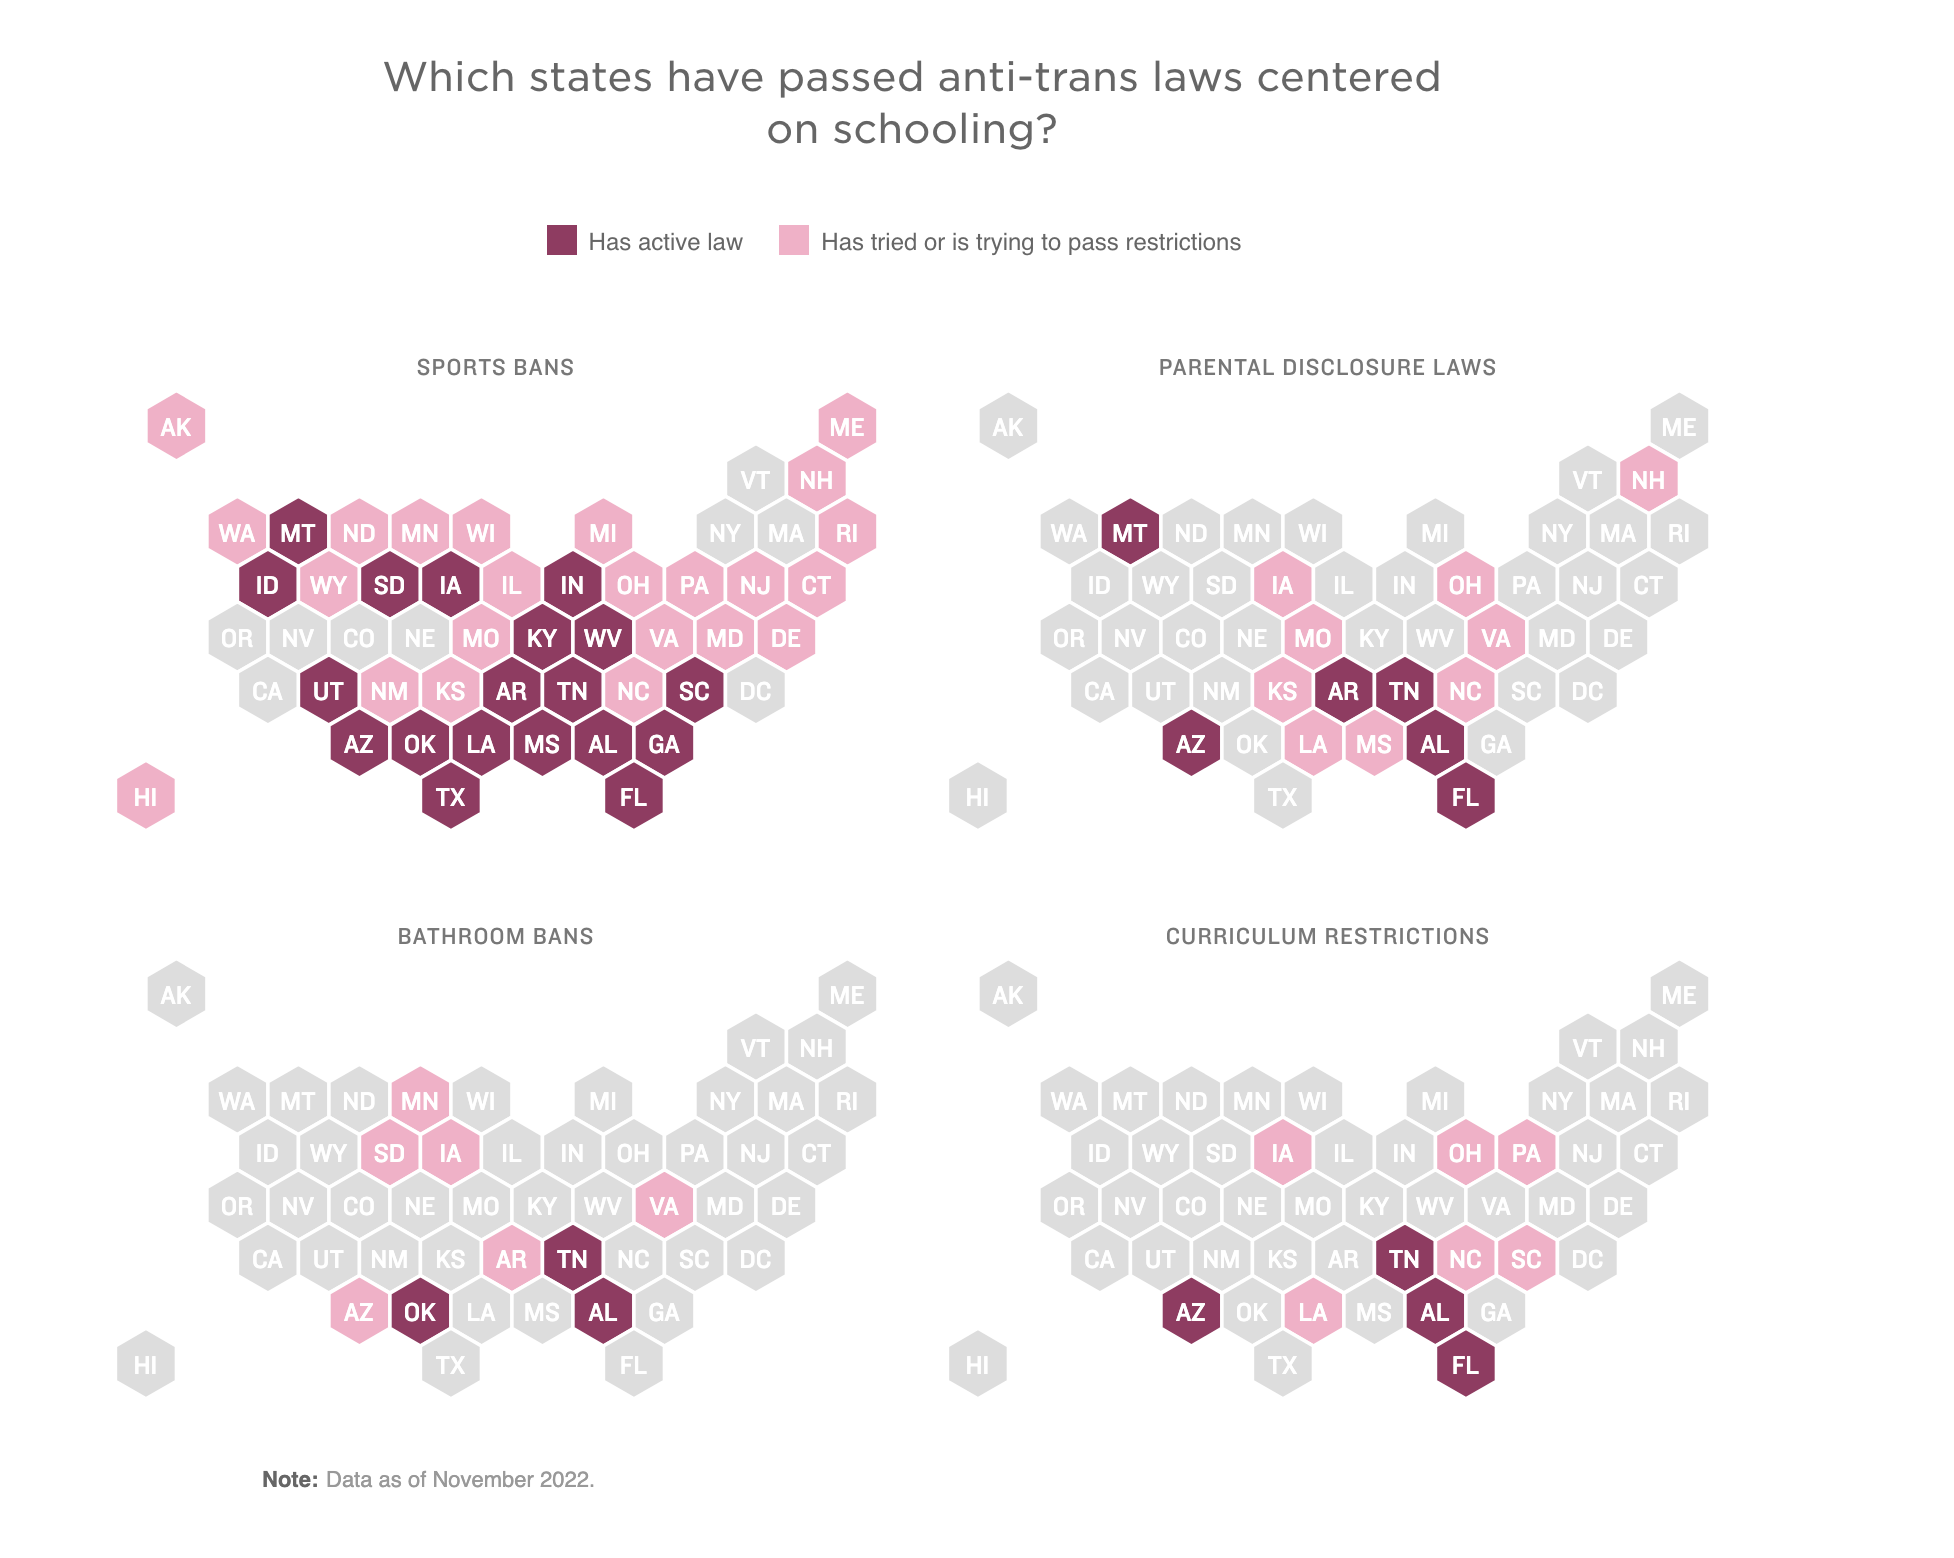 A series of maps show which states have passed anti-trans laws centered on schooling